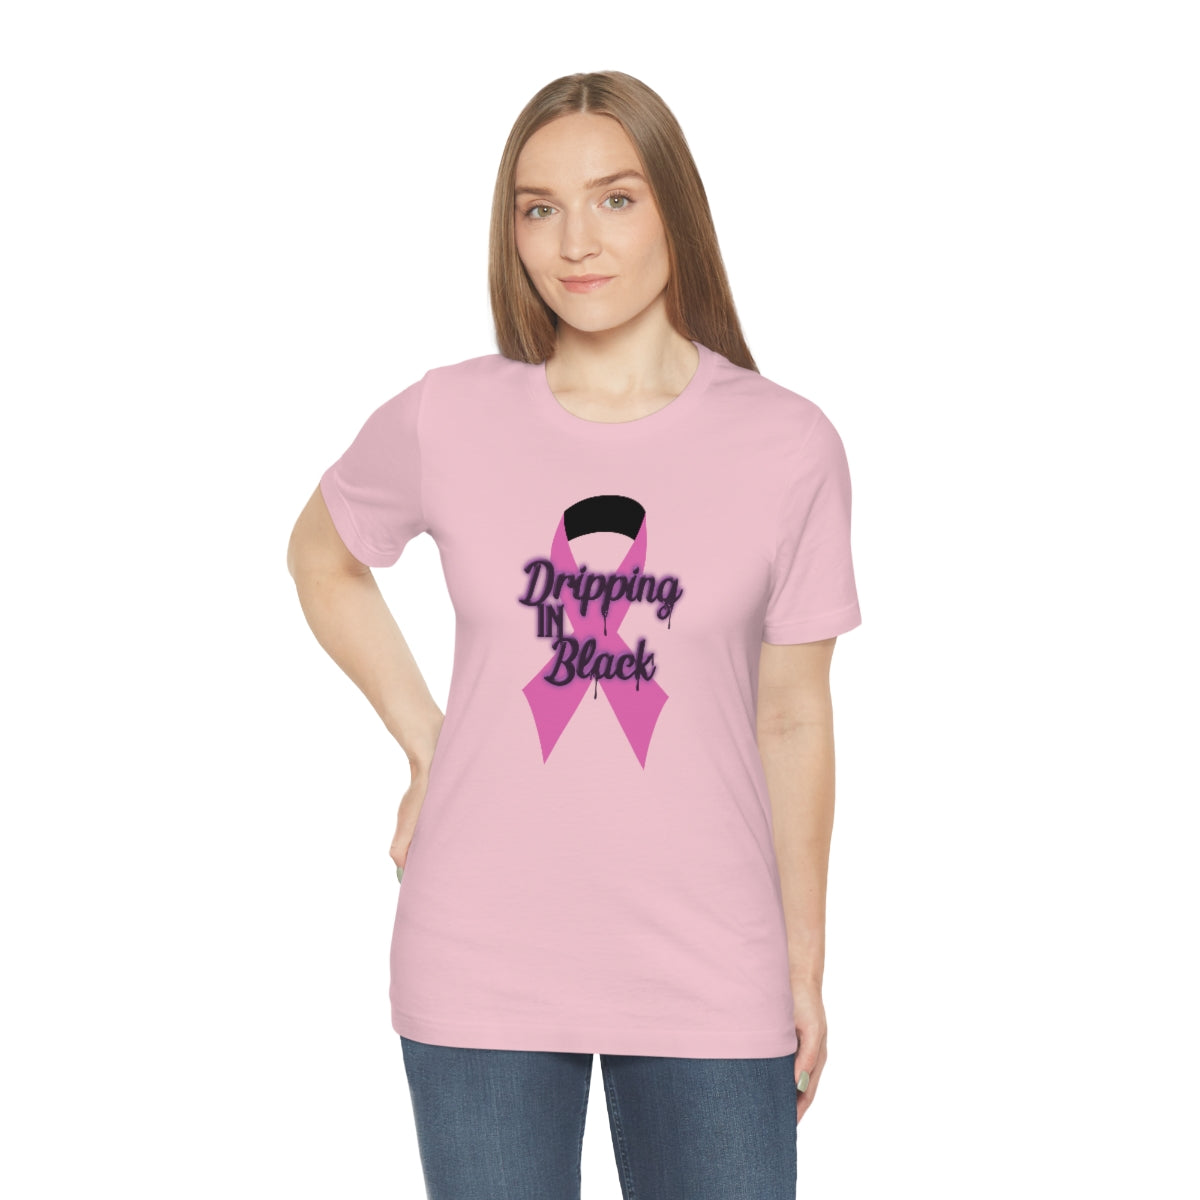 Dripping in Pink T-shirt